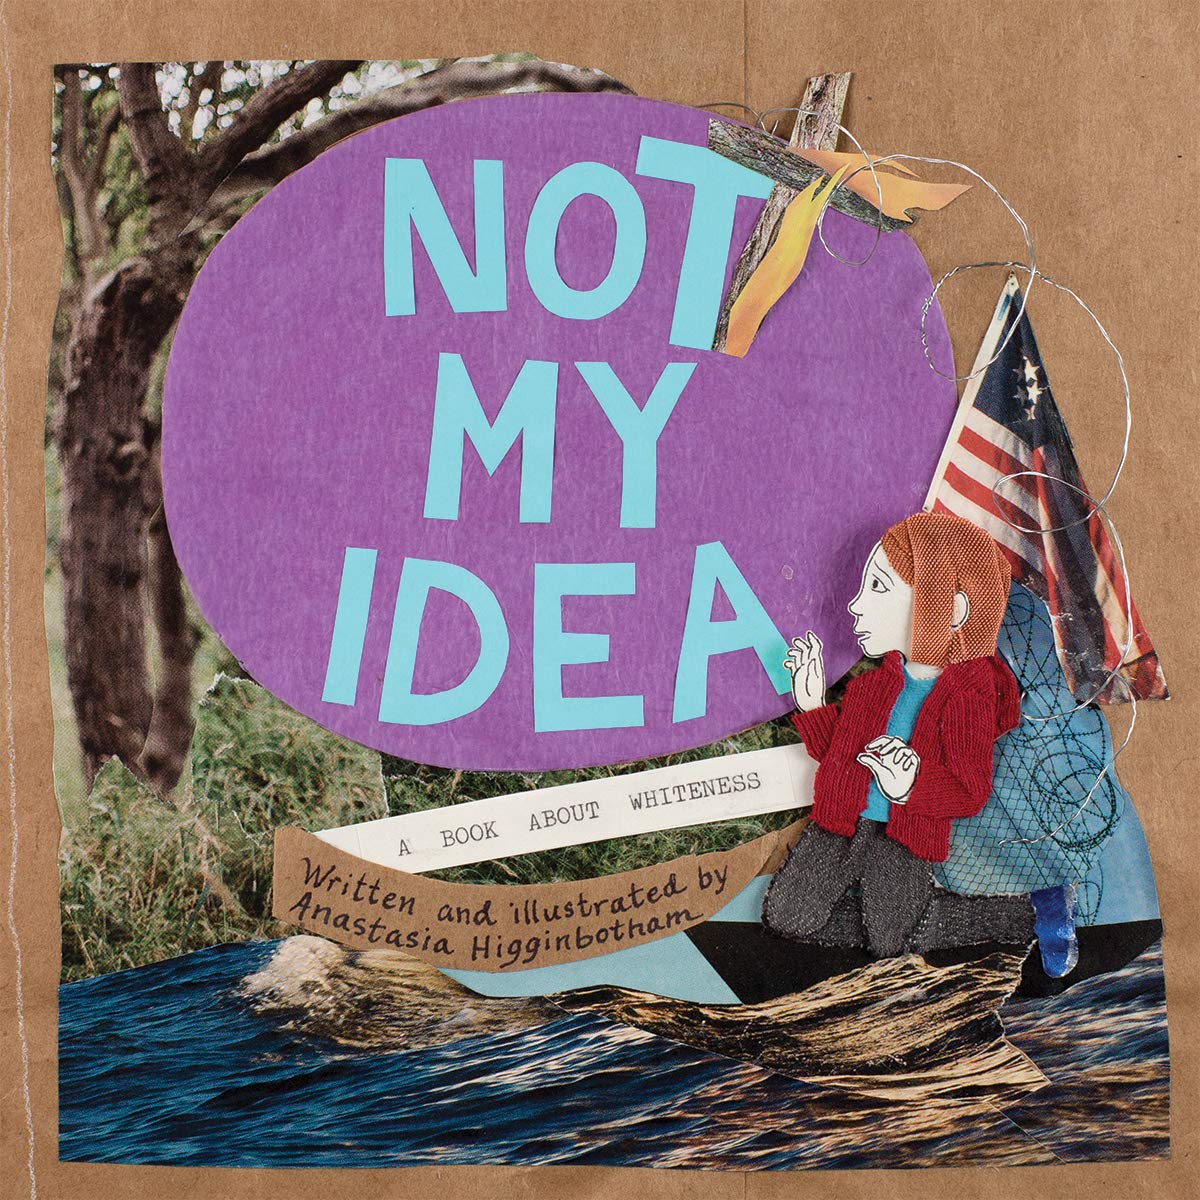 Not My Idea: A Book about Whiteness, by Anastasia Higginbotham